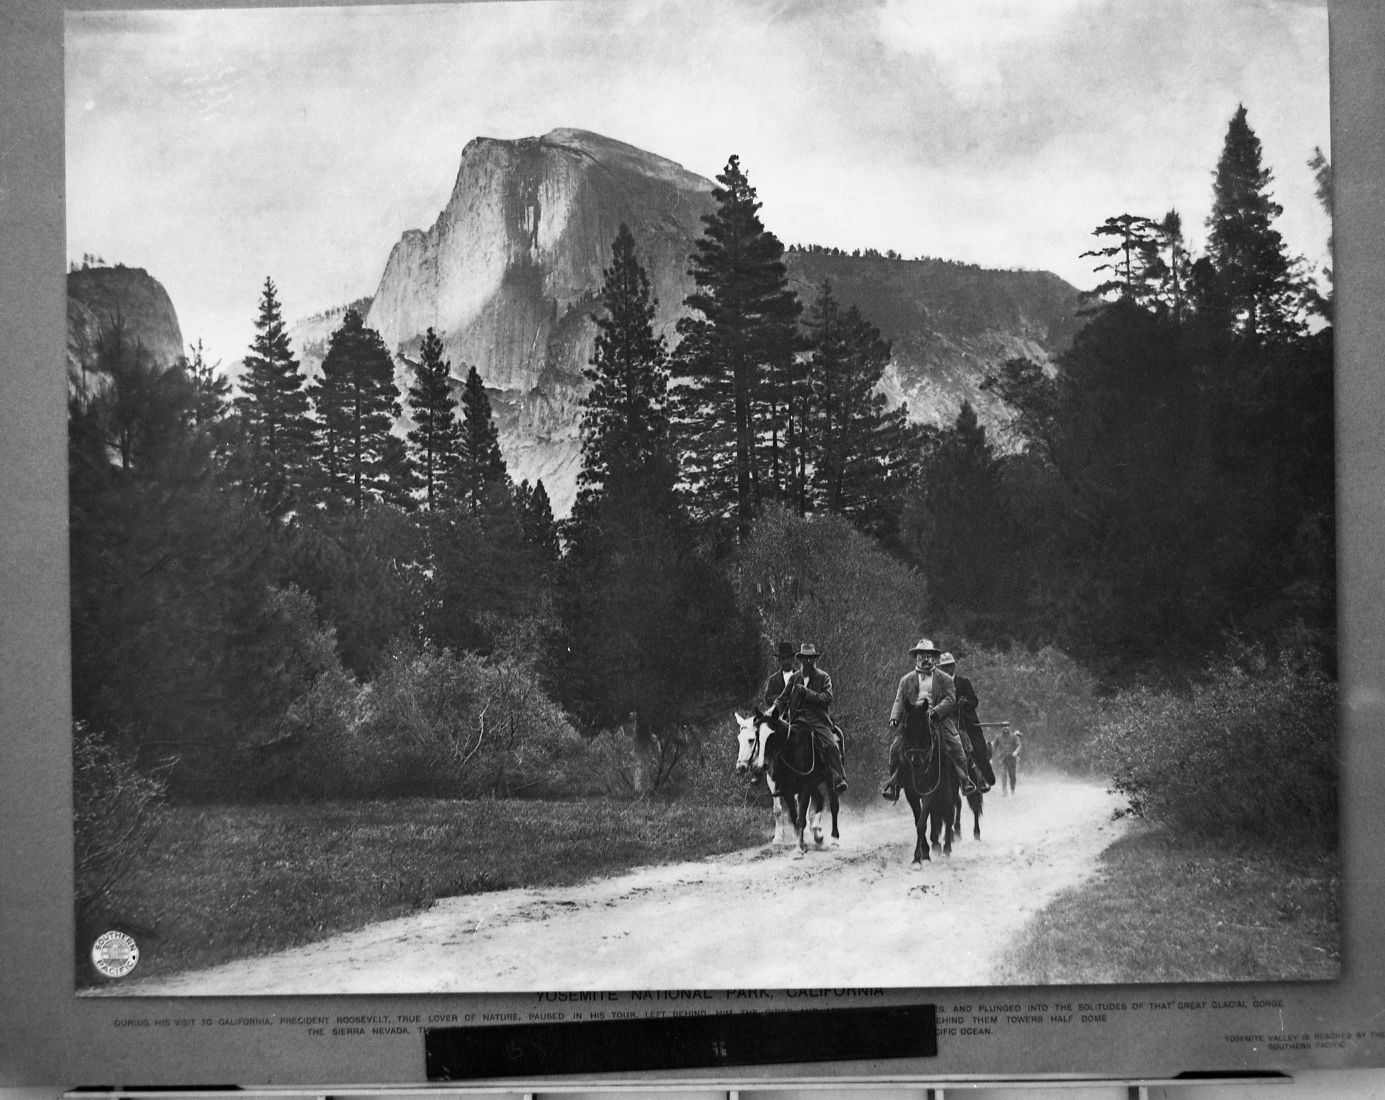 President Theodore Roosevelt and John Muir riding down Yosemite Valley near Camp 19, followed by Archie Leonard (behind John Muir) and Charles Leidig (behind T. R.), rangers. Original taen by Southern Pacific Photographer.